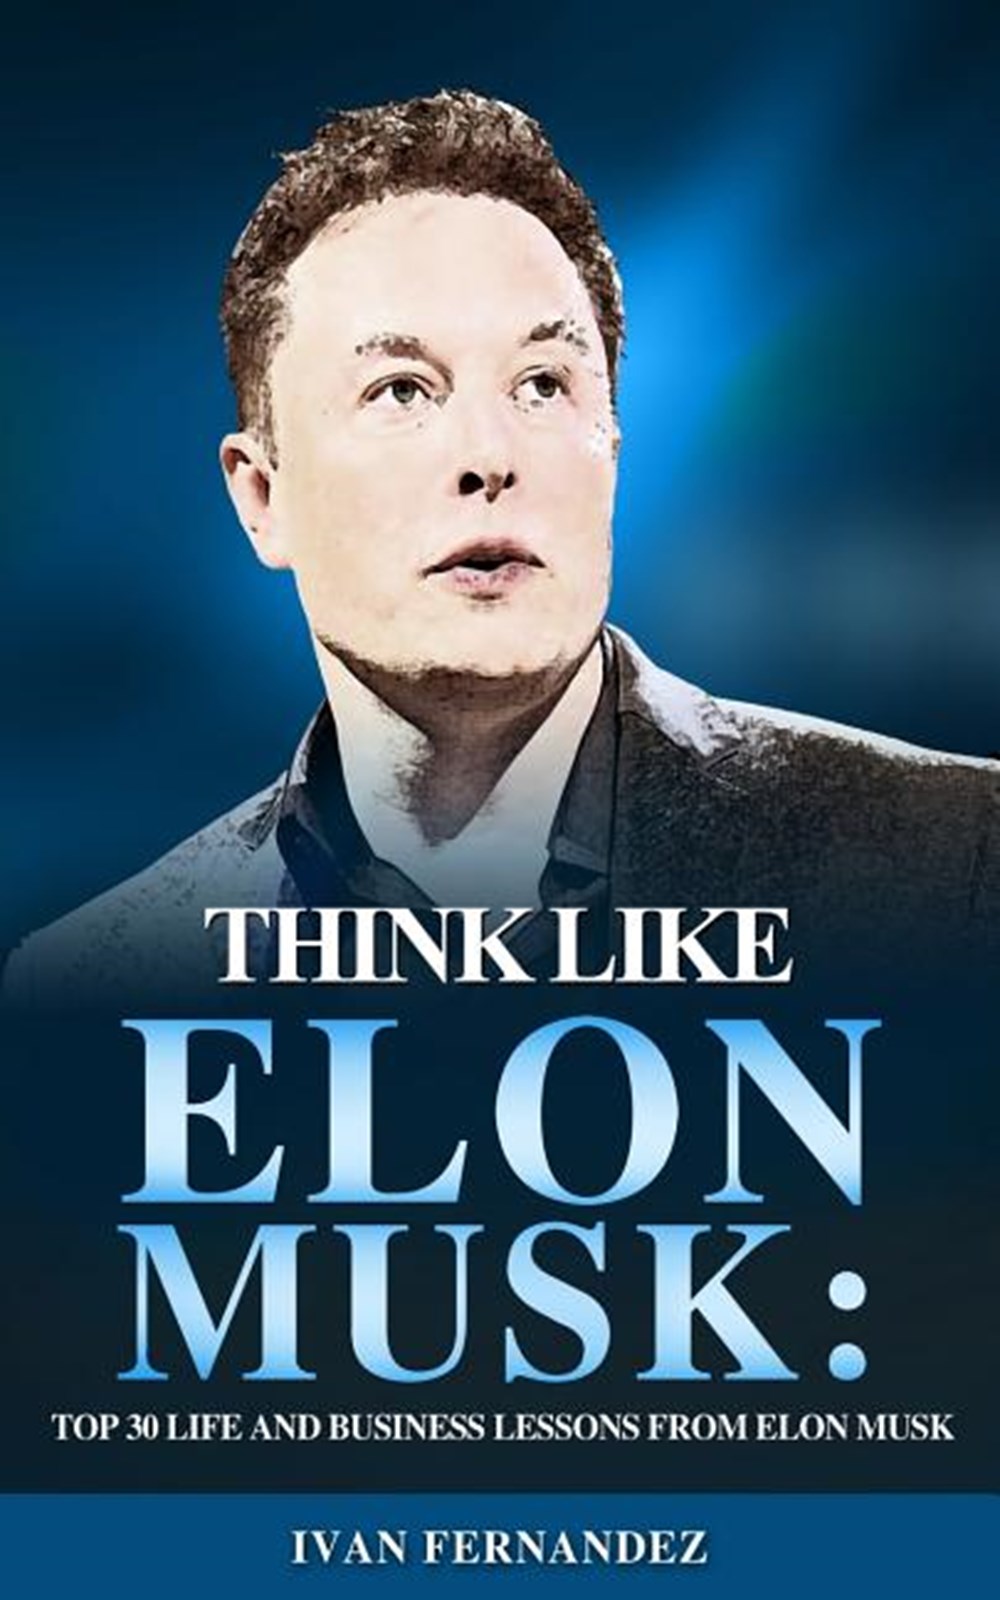 Think Like Elon Musk Top 30 Life and Business Lessons from Elon Musk